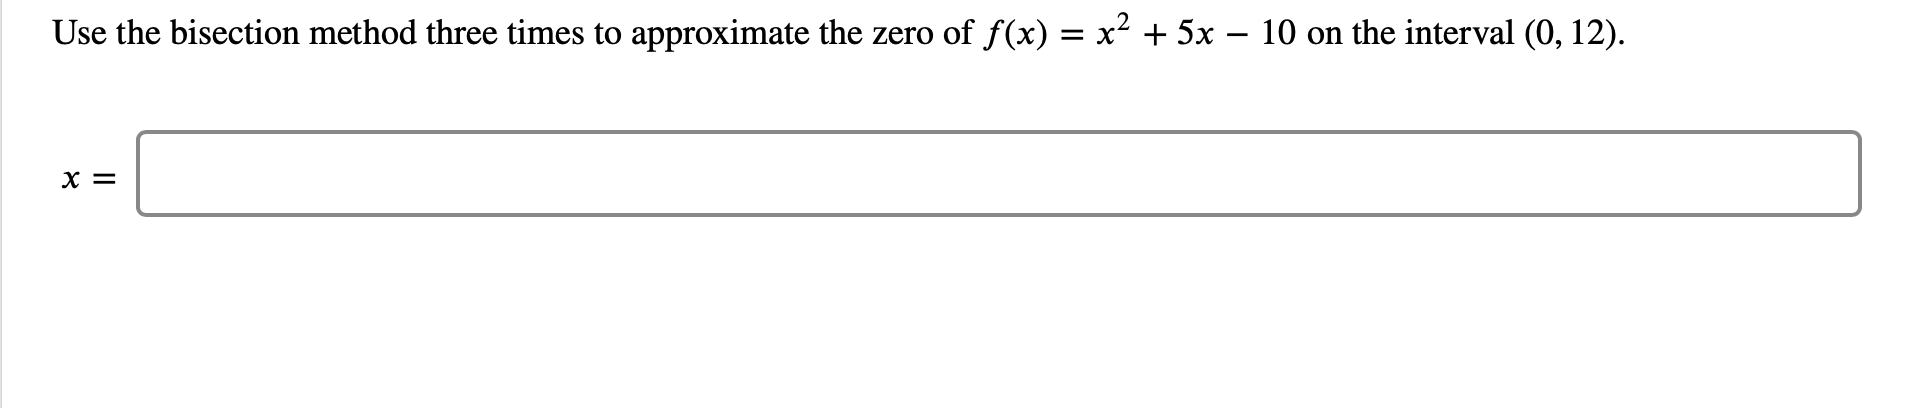 Use the bisection method three times to approximate the zero of f(x) = x2+ 5x - 10 on the interval (0, 12)
х %3
